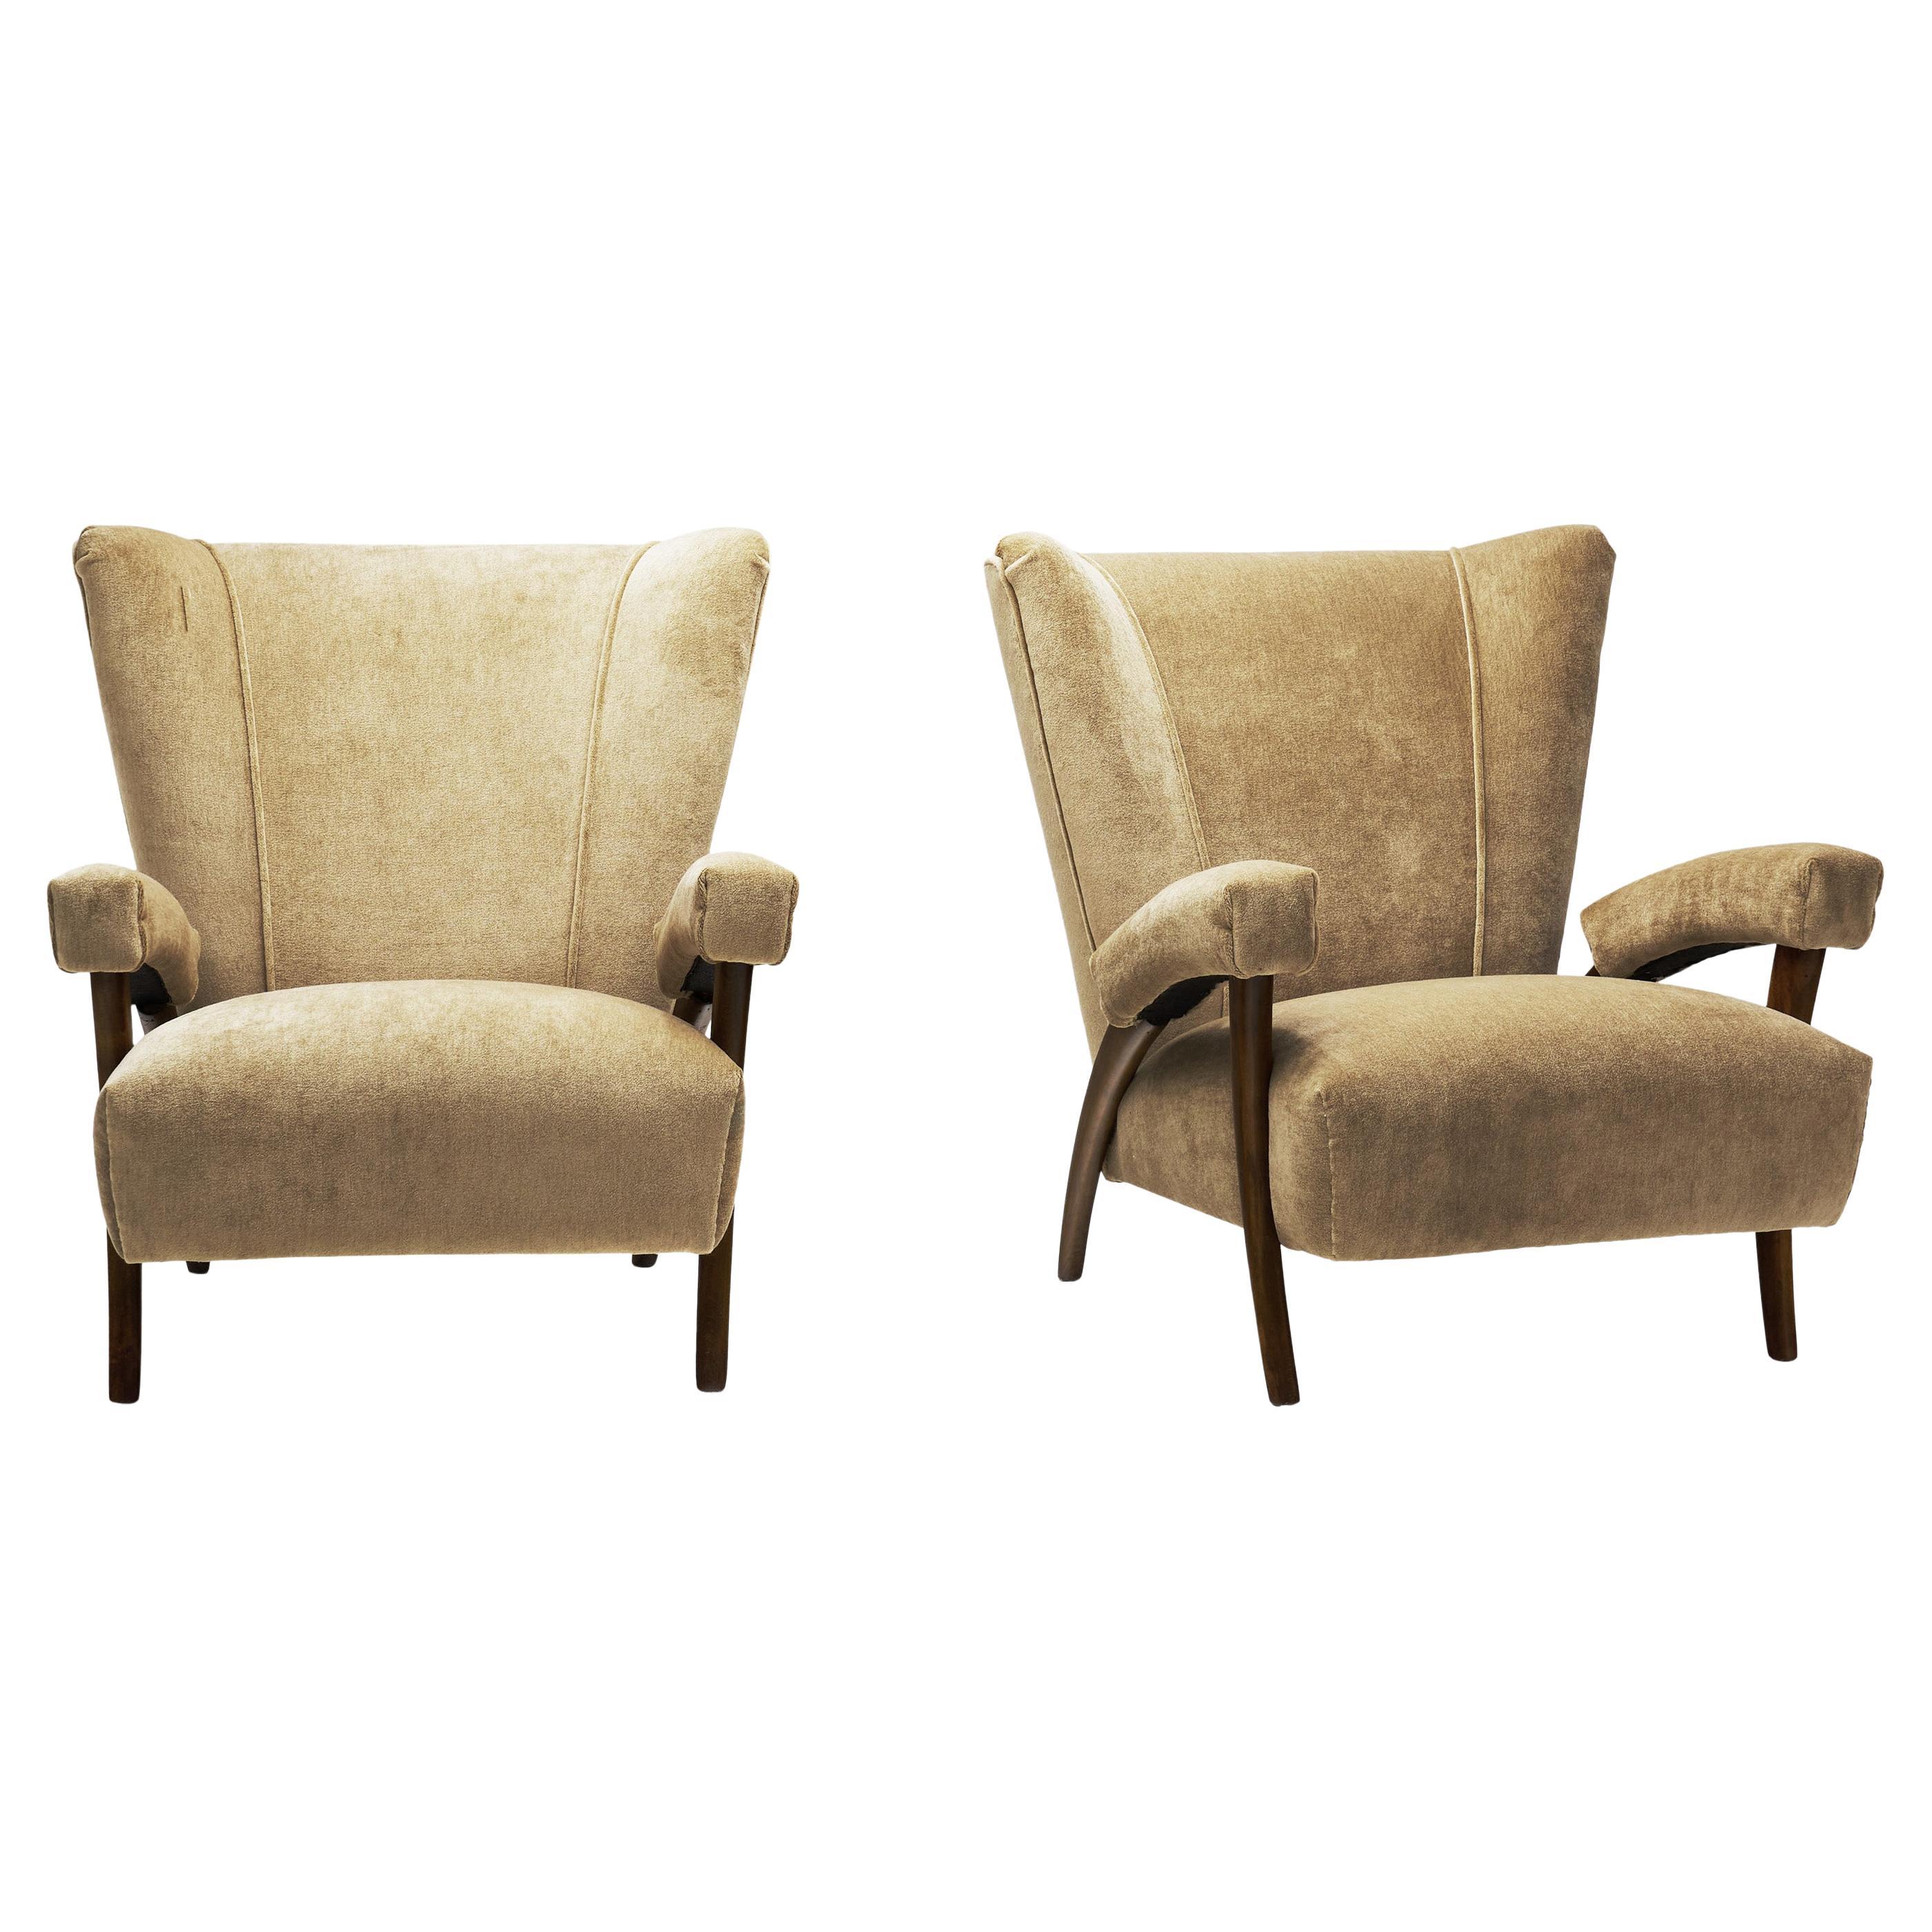 Italian Modern Armchairs with "Tusk" Legs by Paolo Buffa (attr.), Italy 1950s For Sale